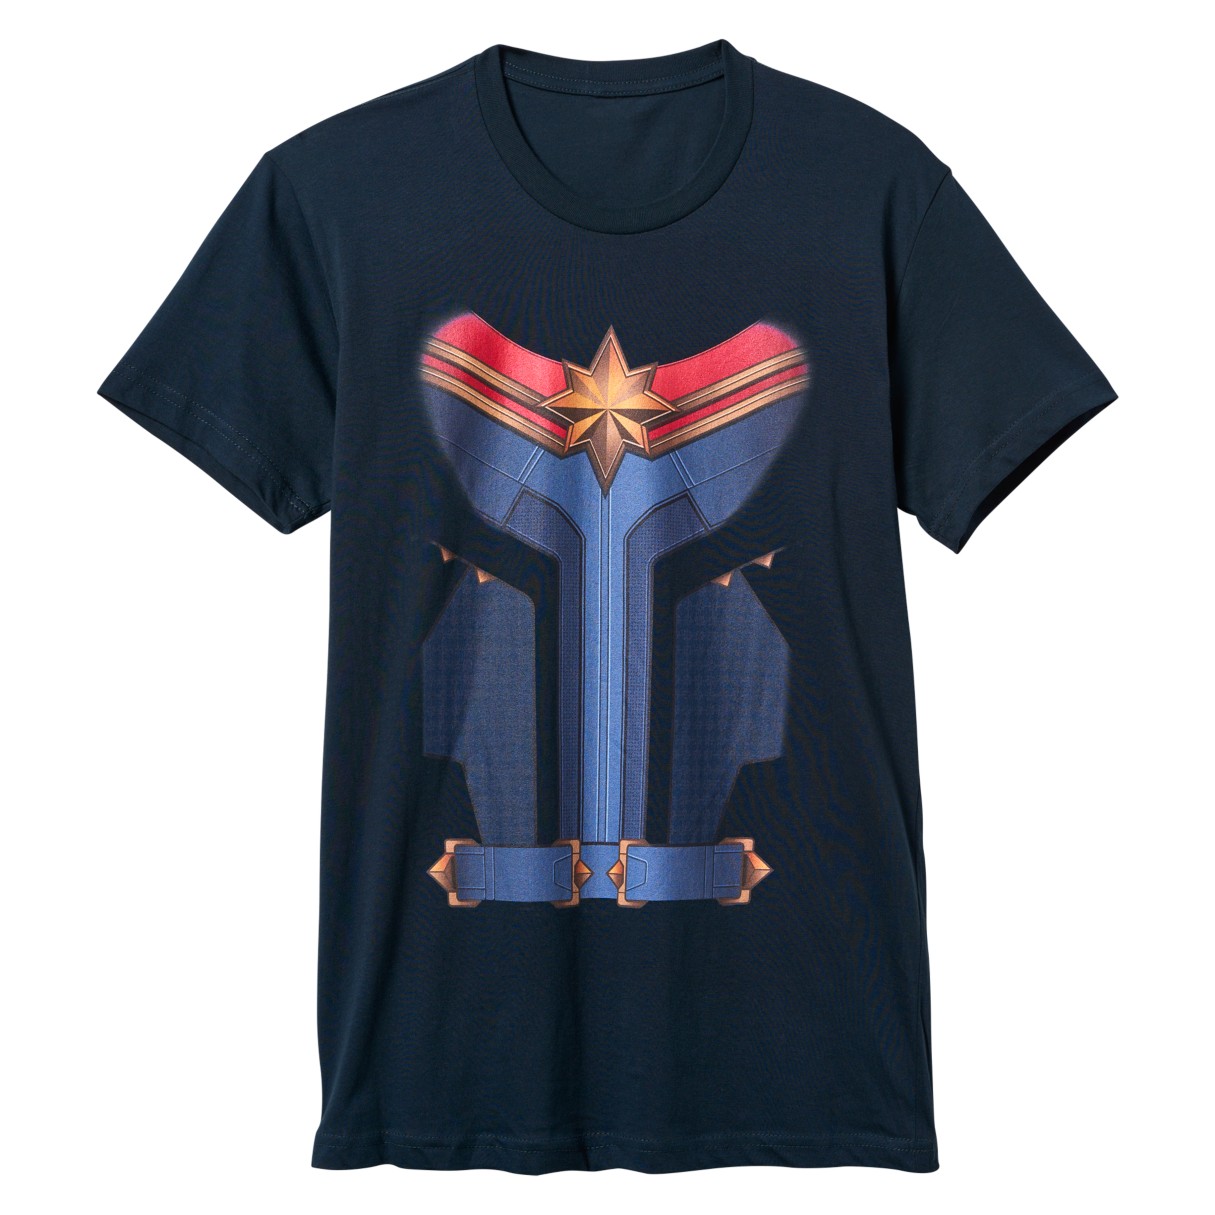 Captain Marvel Costume T-Shirt for Adults